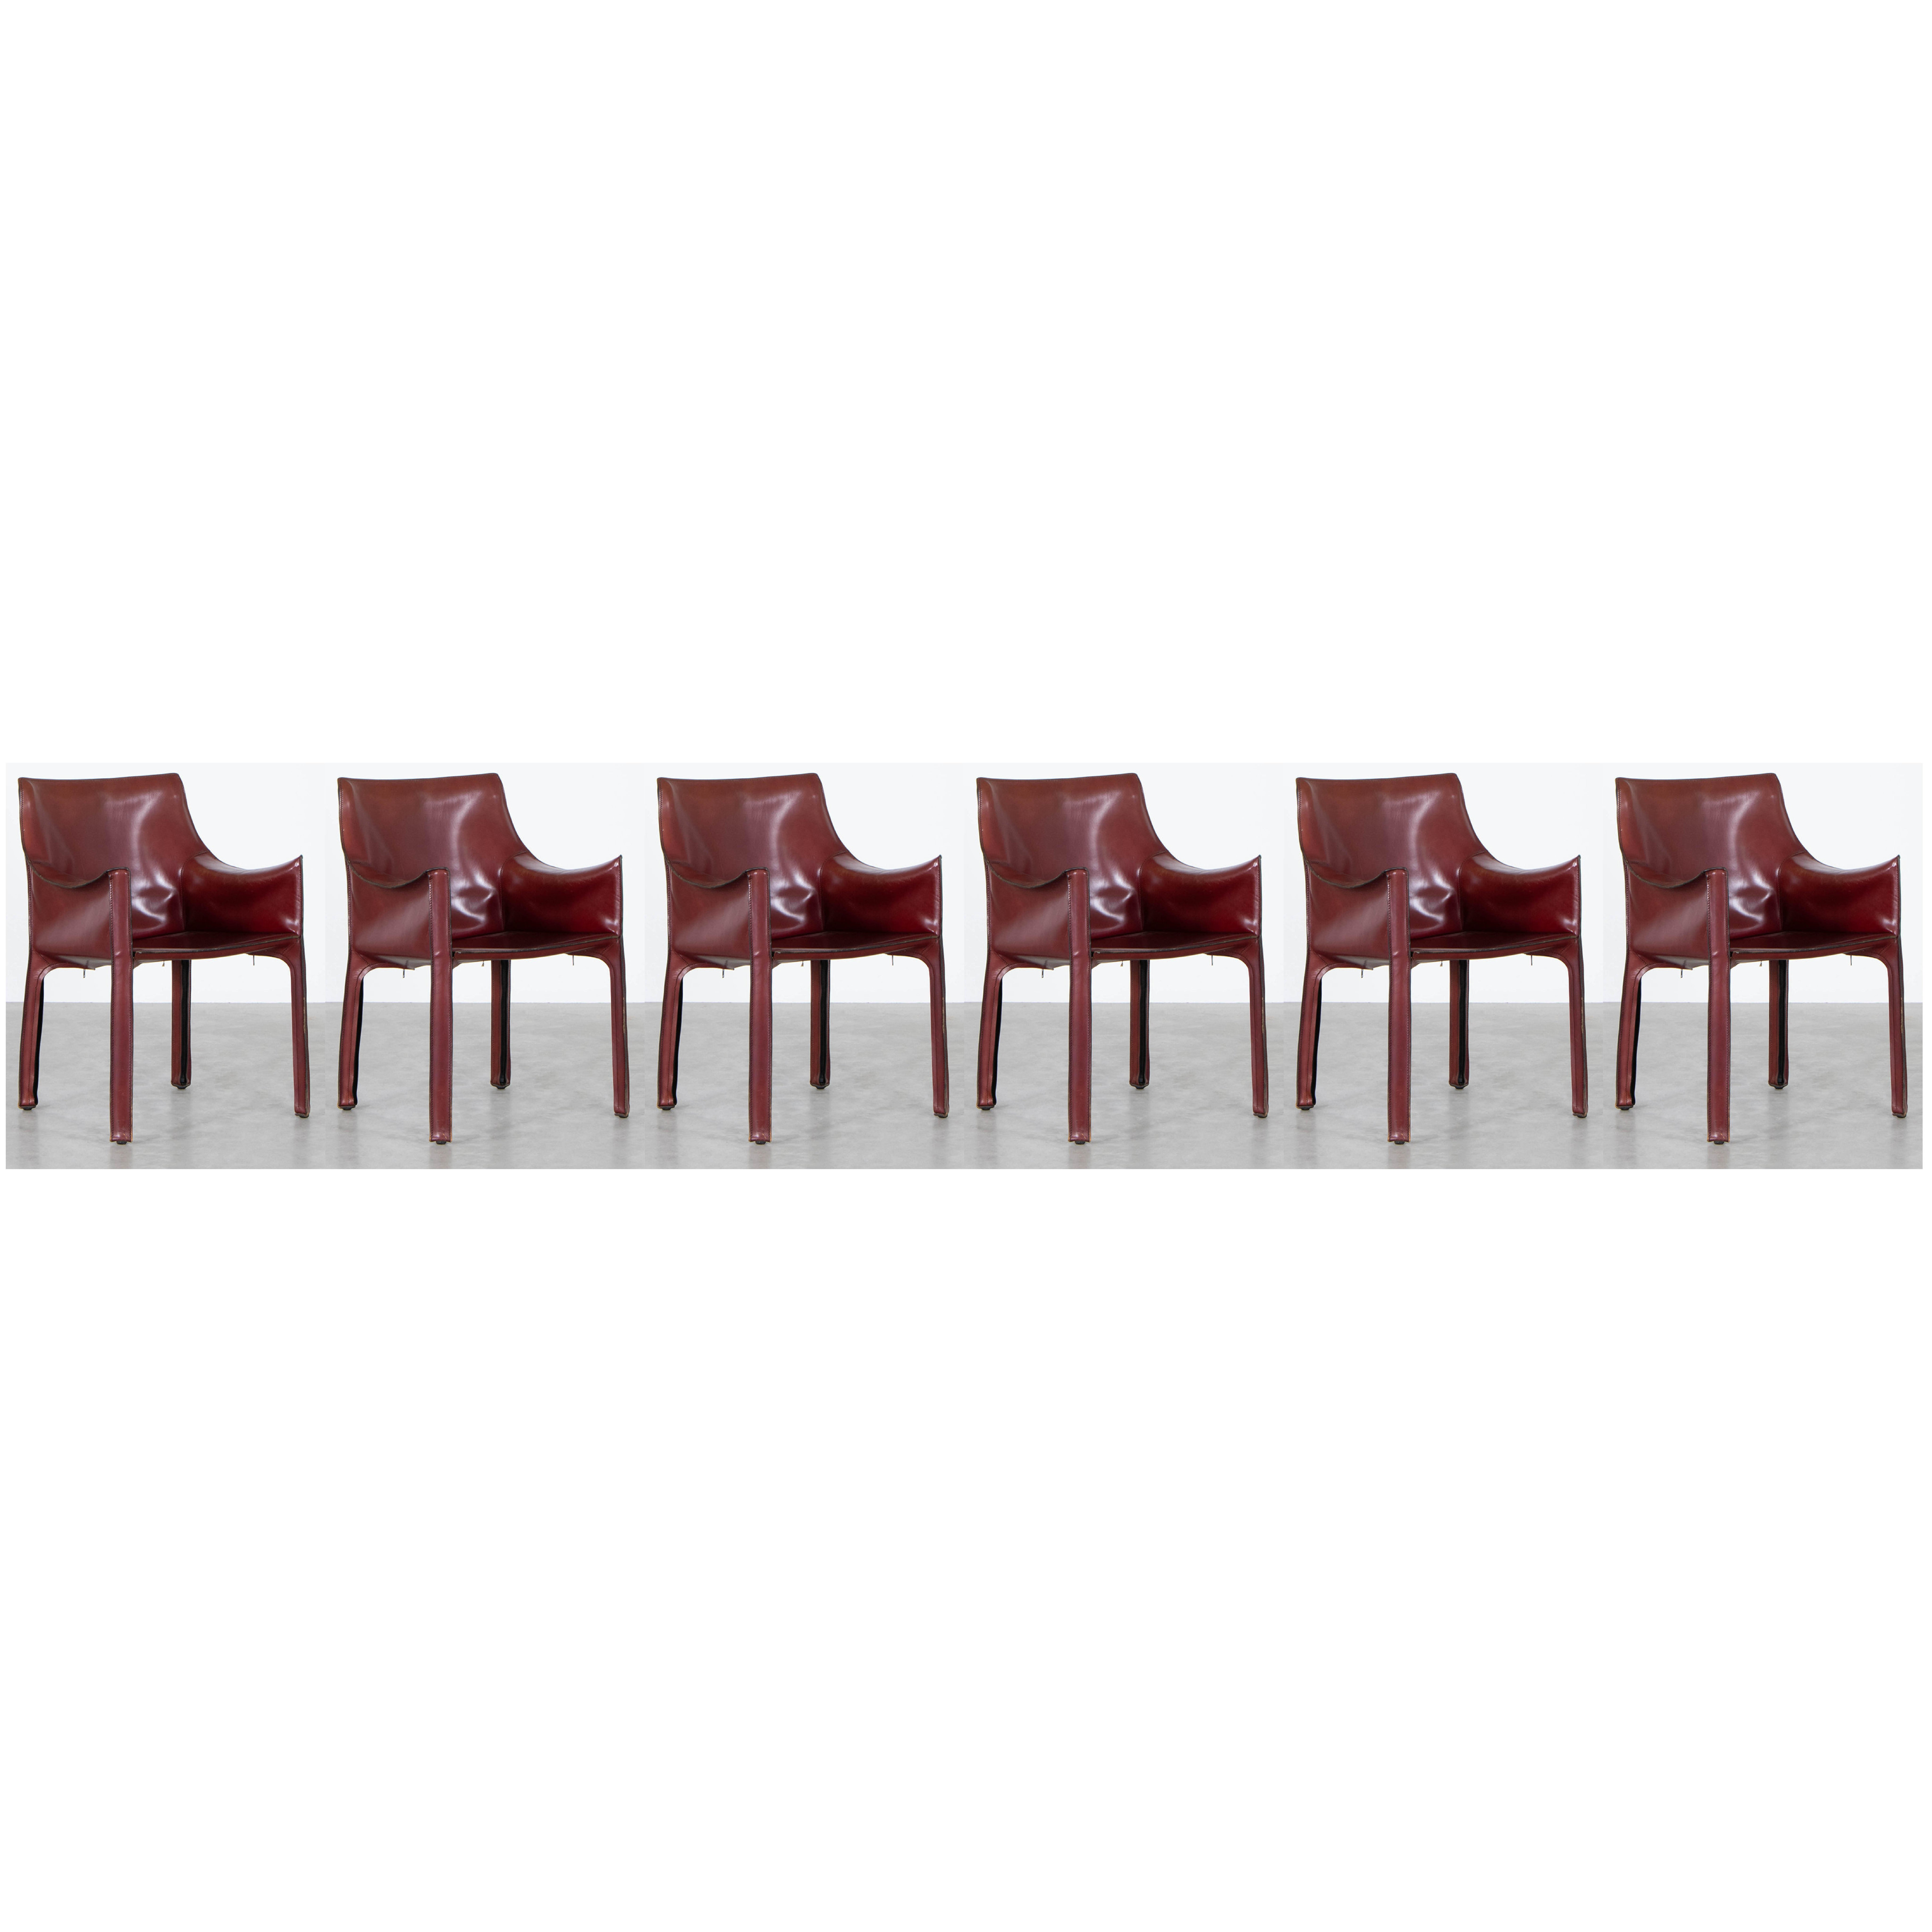 Mario Bellini "CAB 413" Chairs for Cassina in Bordeaux, 1977, Set of 6 For Sale